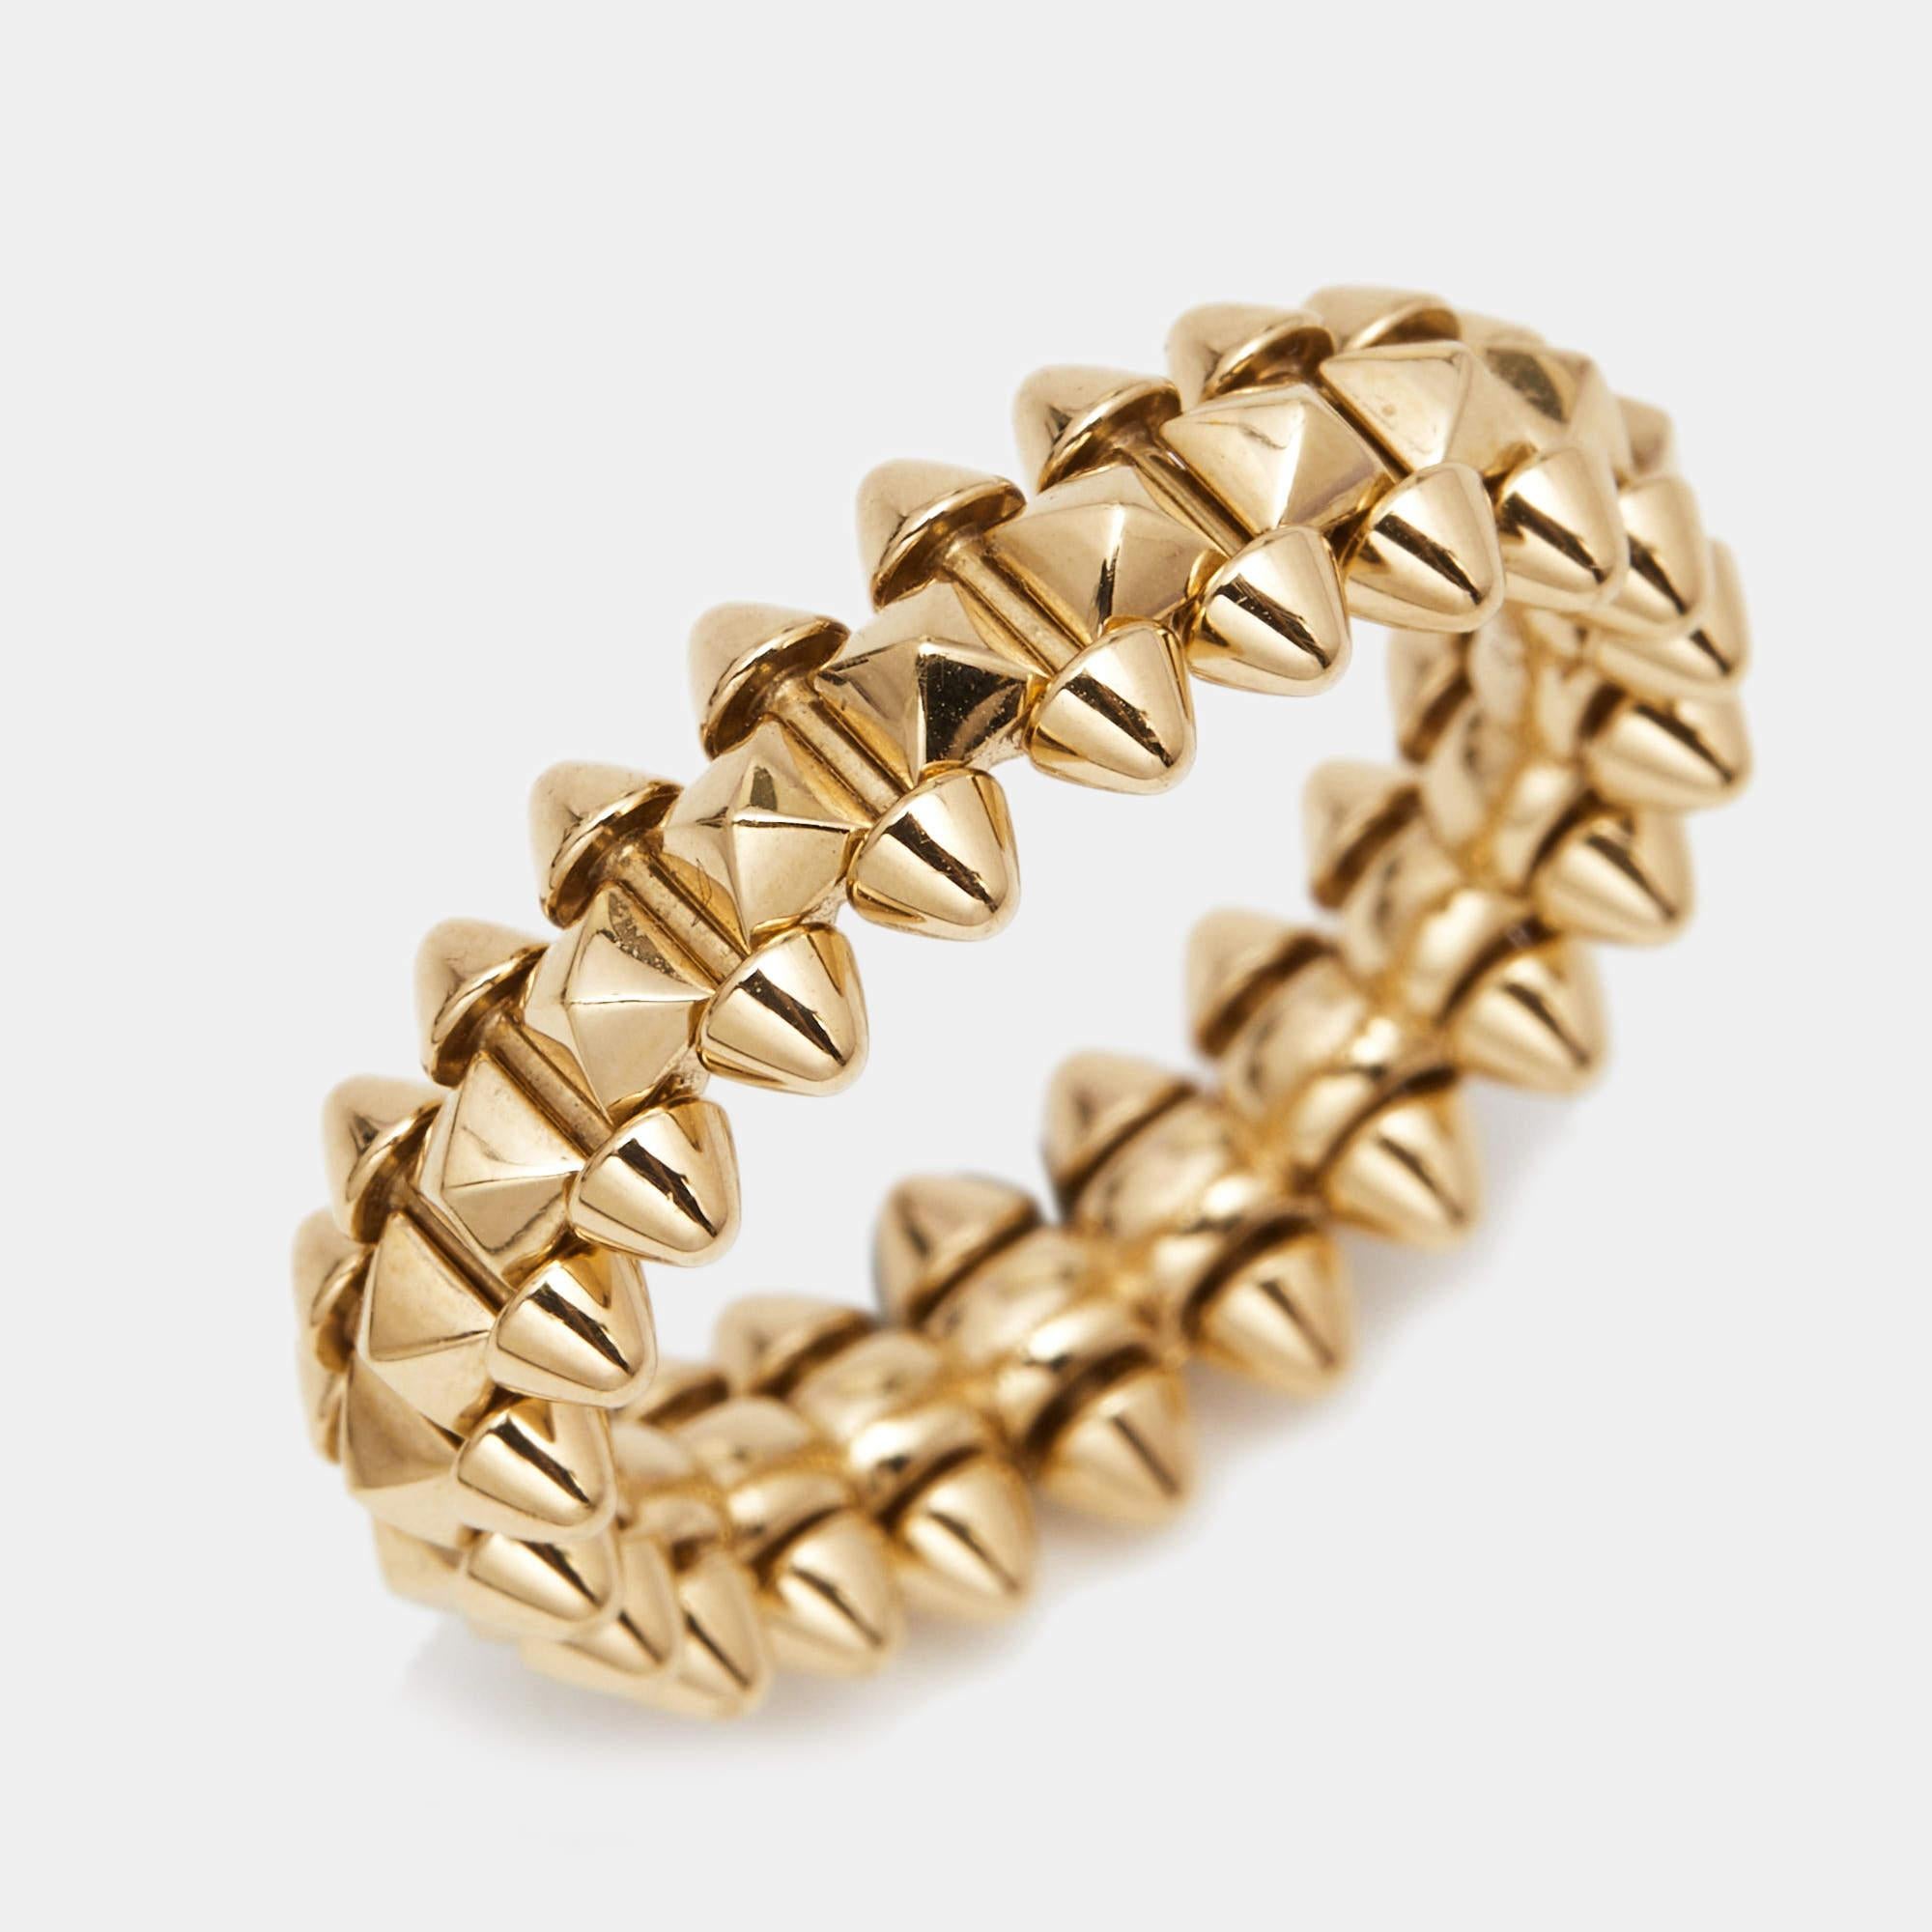 The Cartier Clash de Cartier ring is an exquisite piece of jewelry that showcases a harmonious blend of elegance and edginess. Crafted from luxurious 18k rose gold, the ring features a dynamic design with studded pyramid-shaped motifs, creating a